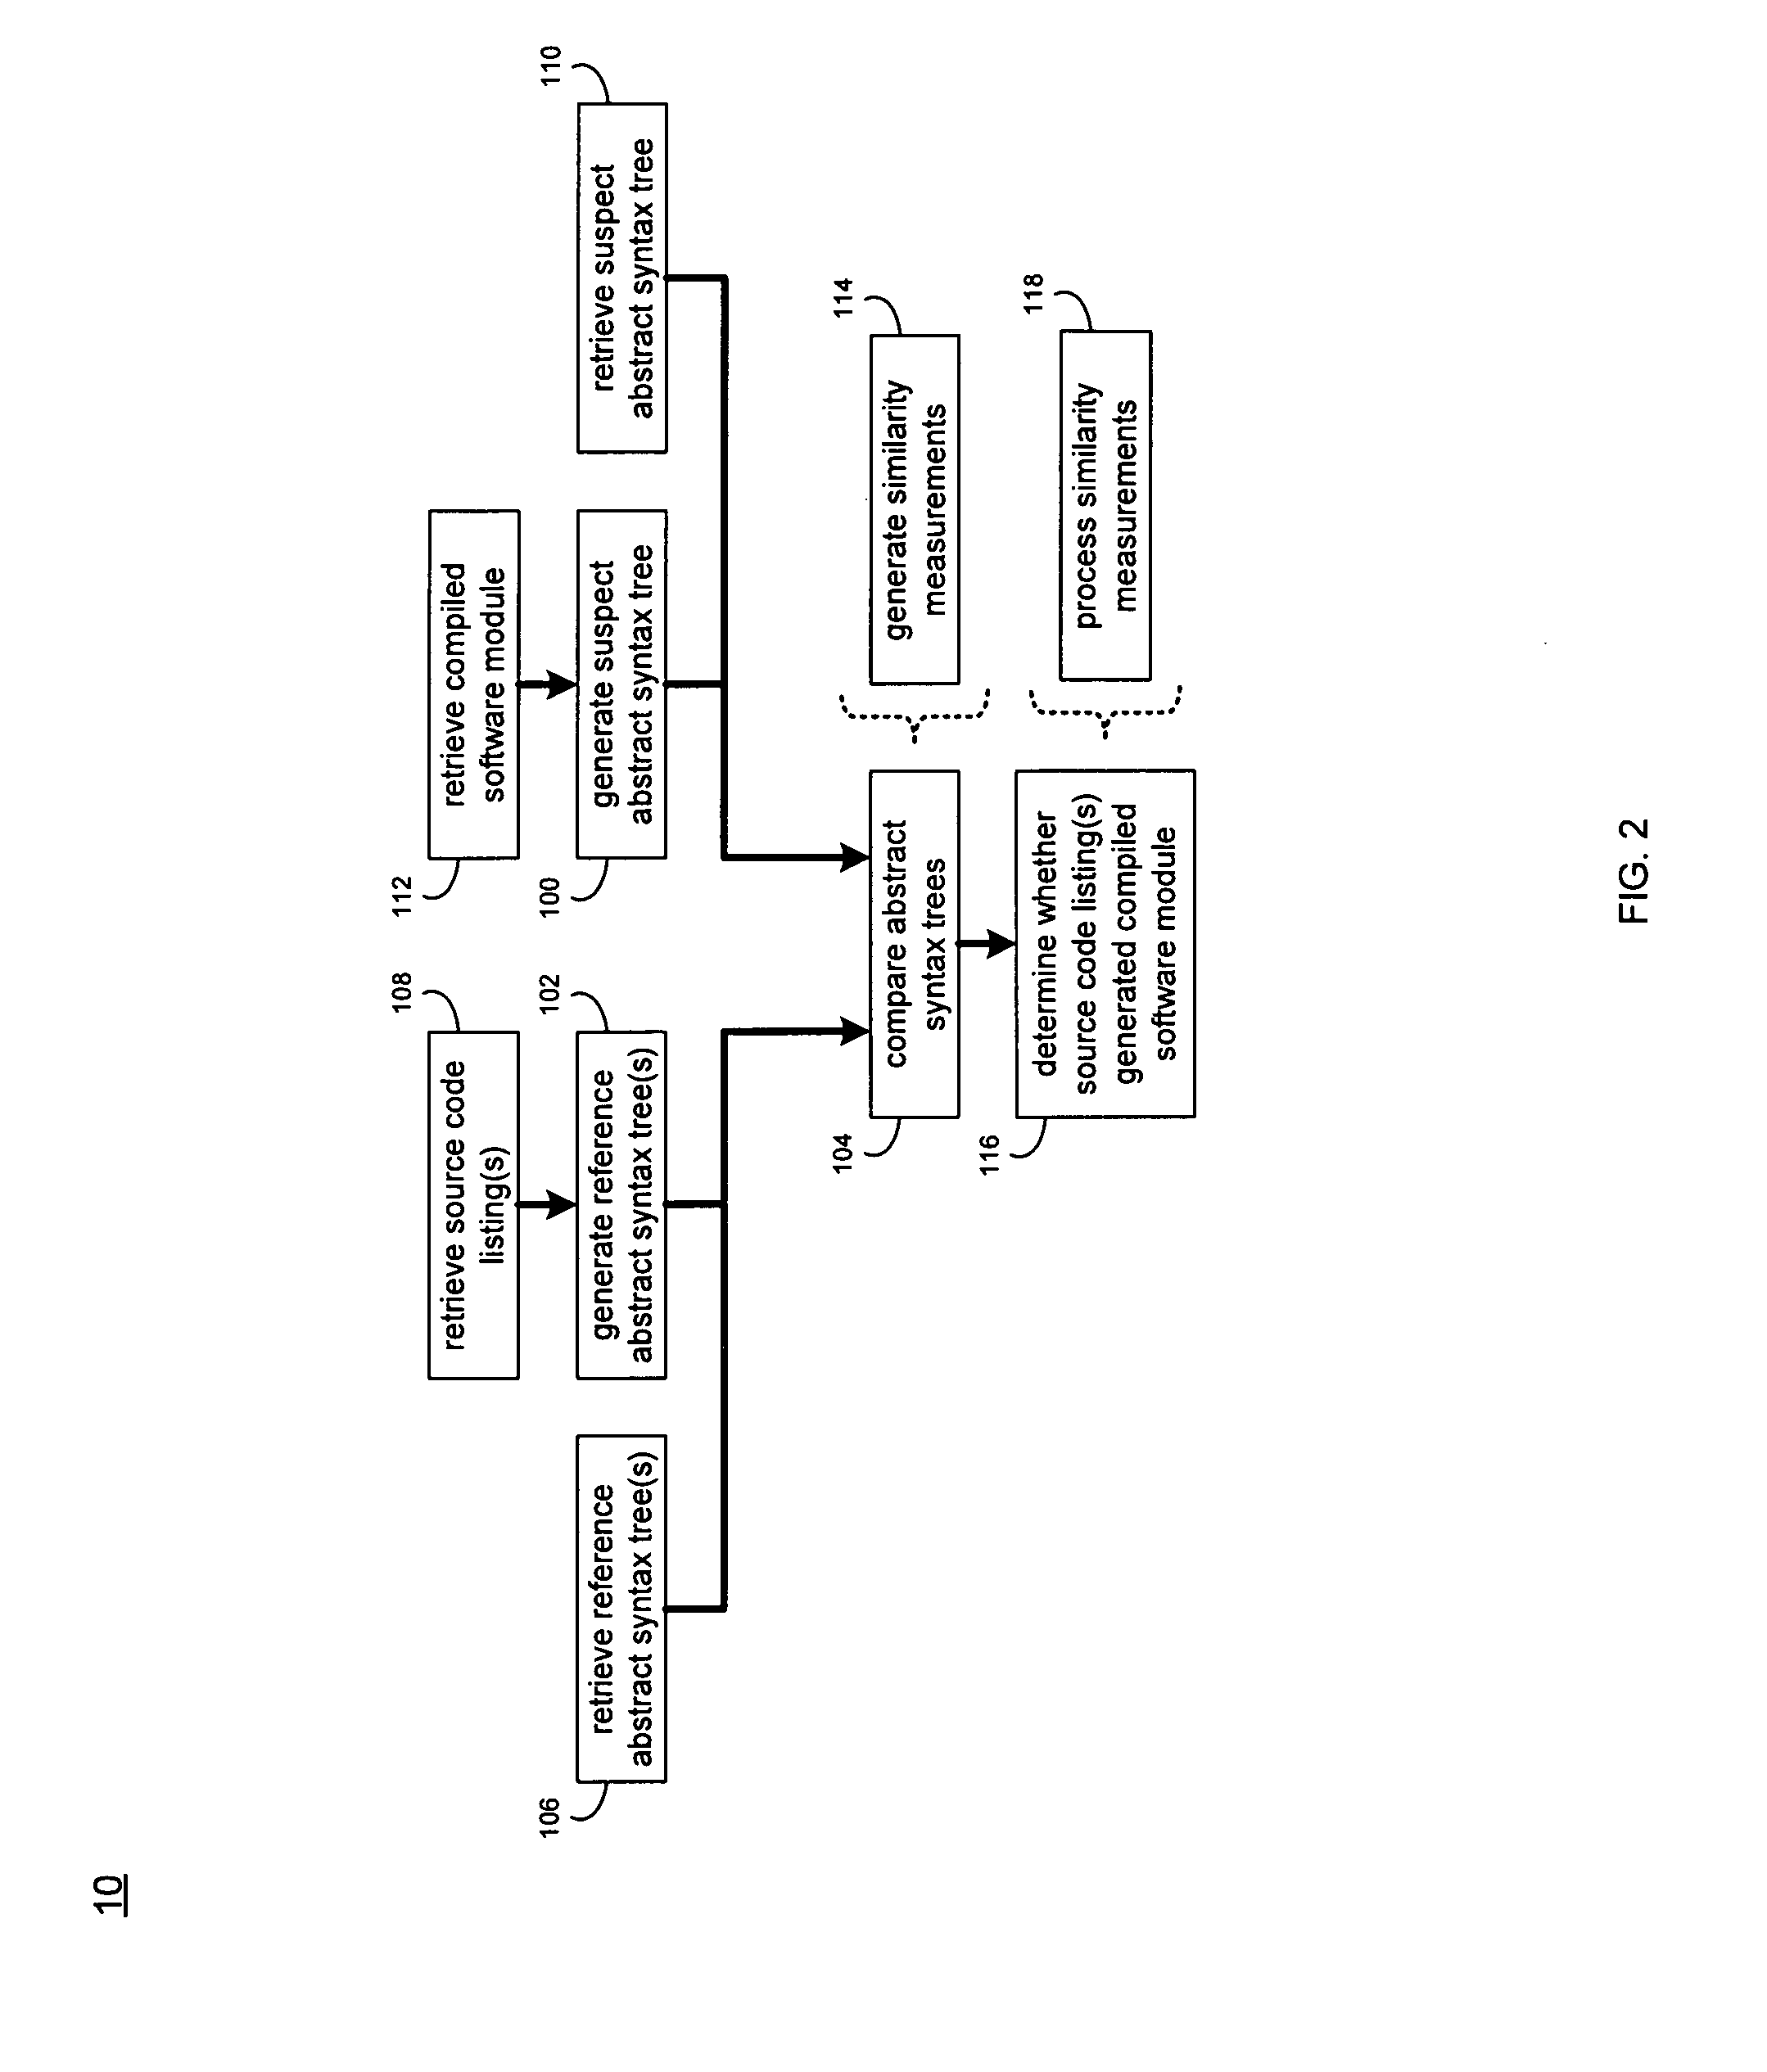 System and method for comparing partially decompiled software